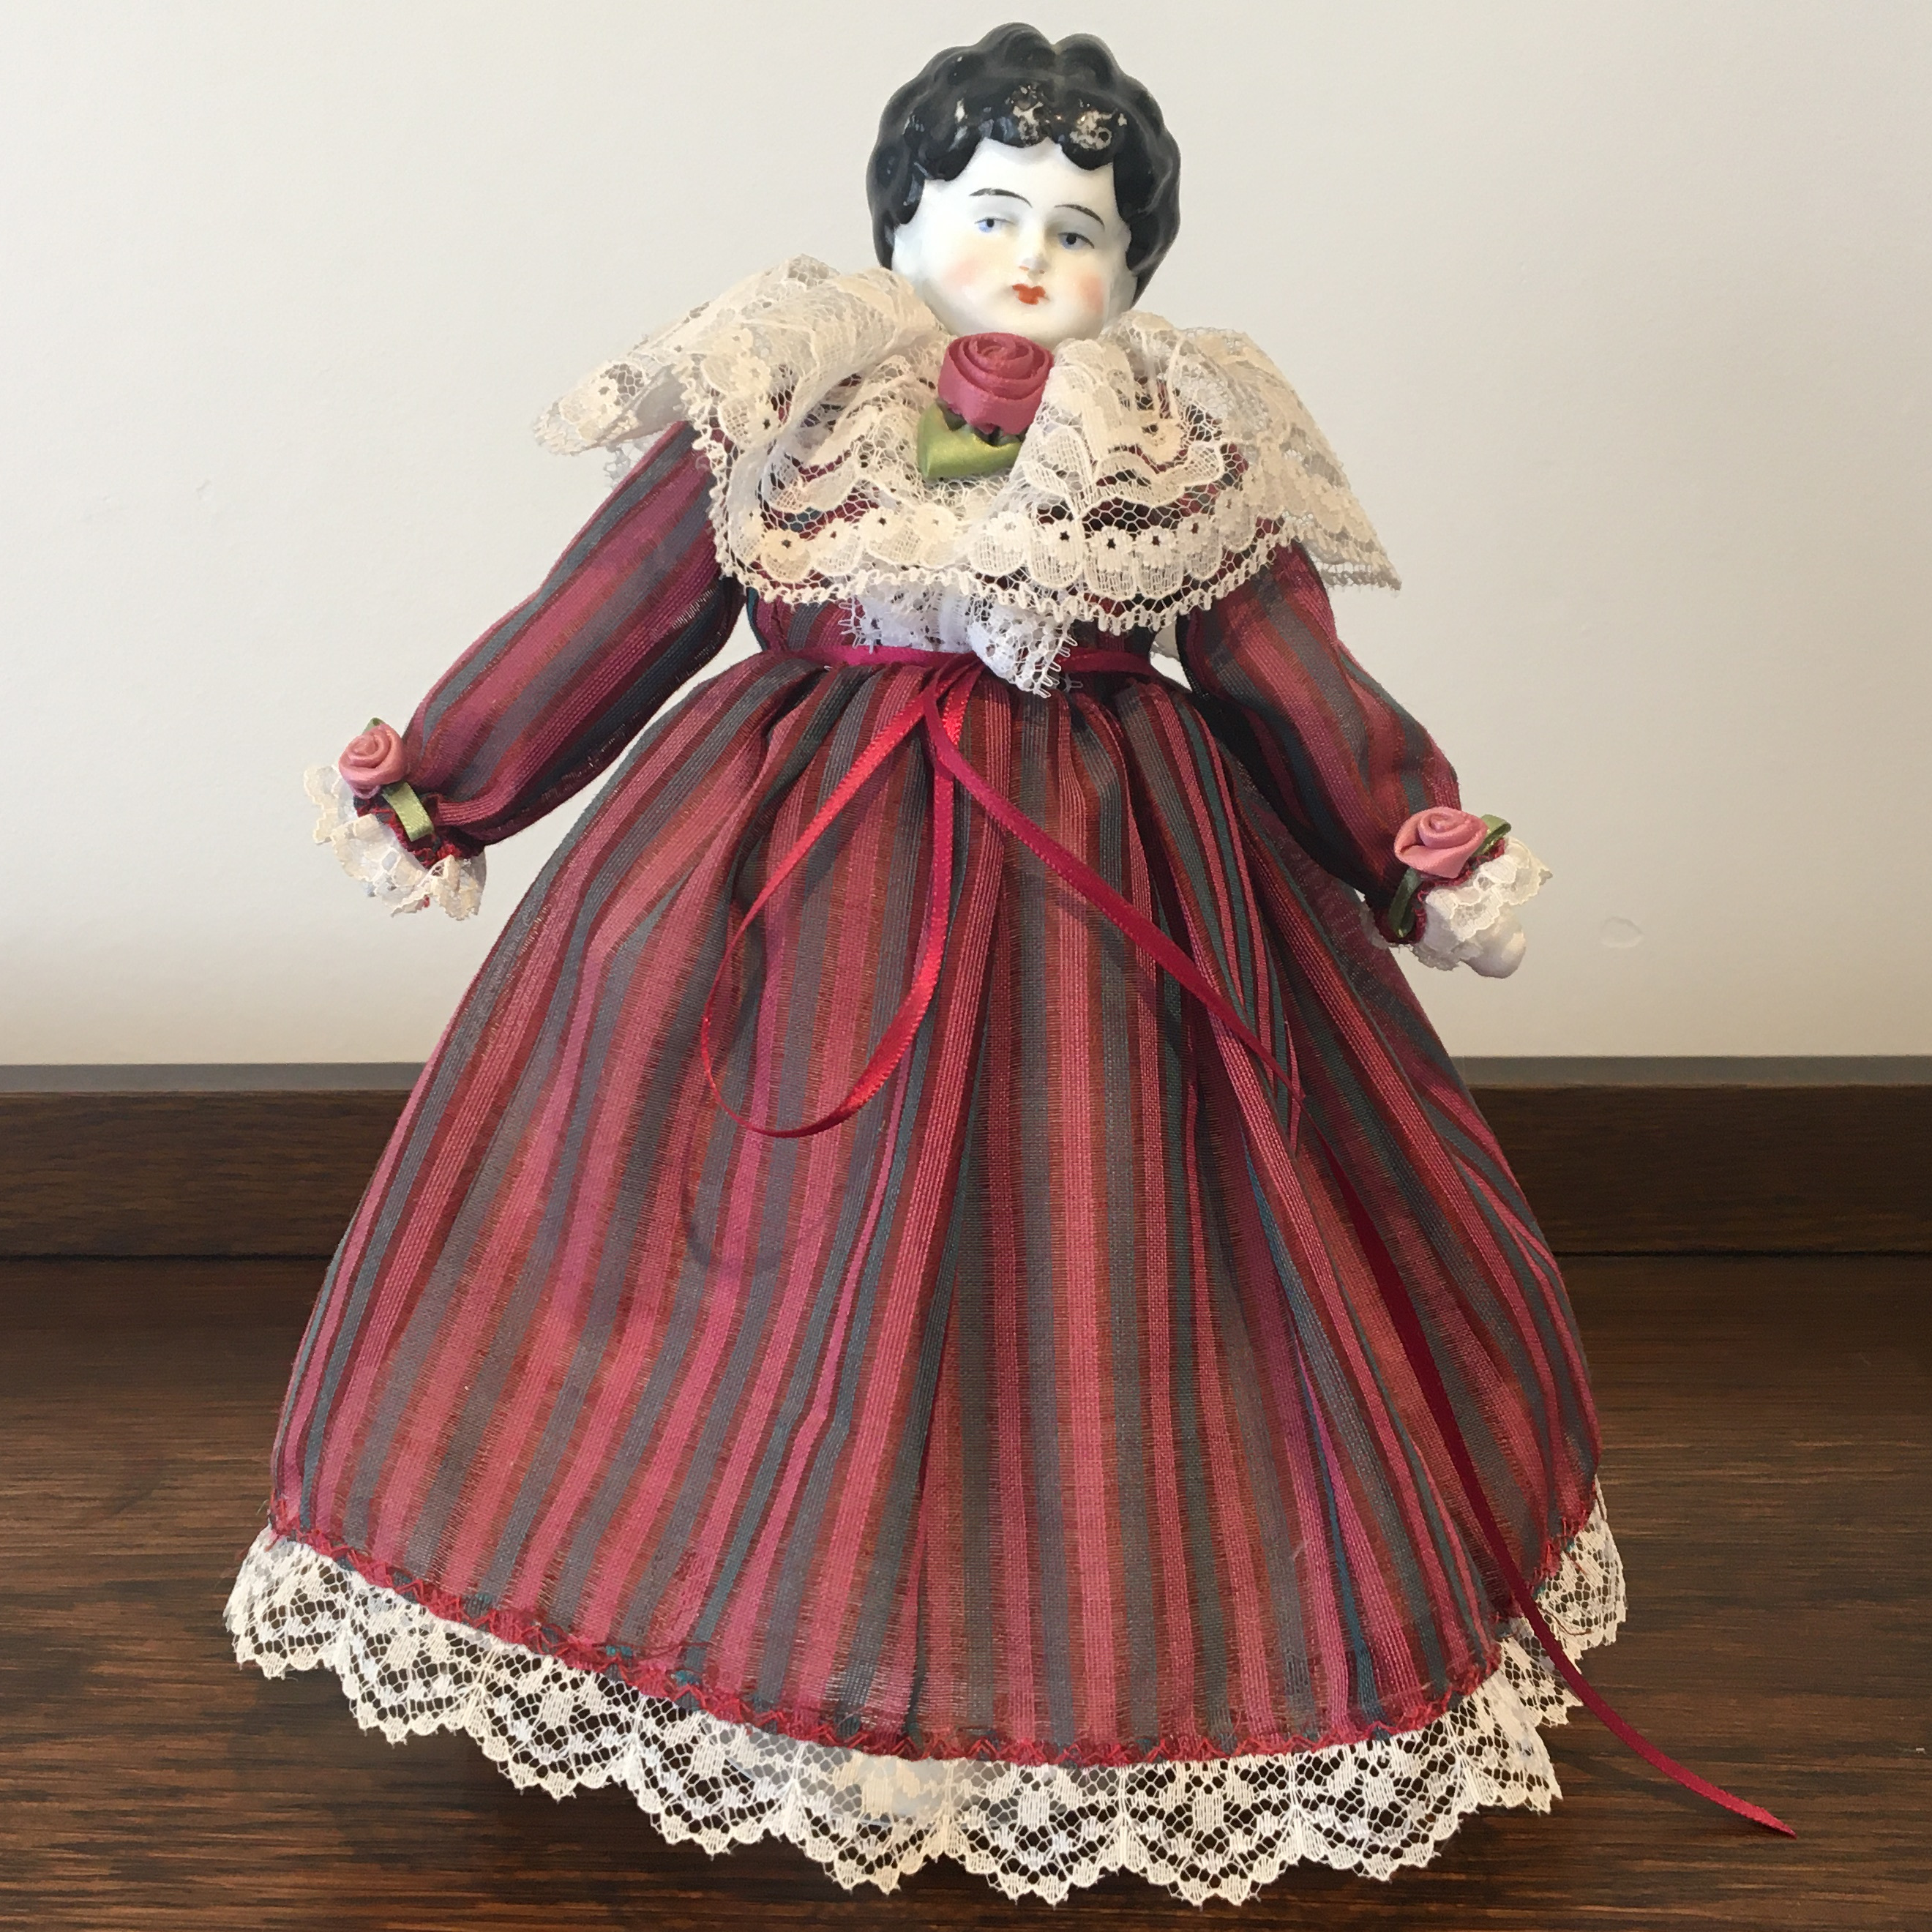 Antique china doll in a modern red and purple dress with vertical stripes and lace trim